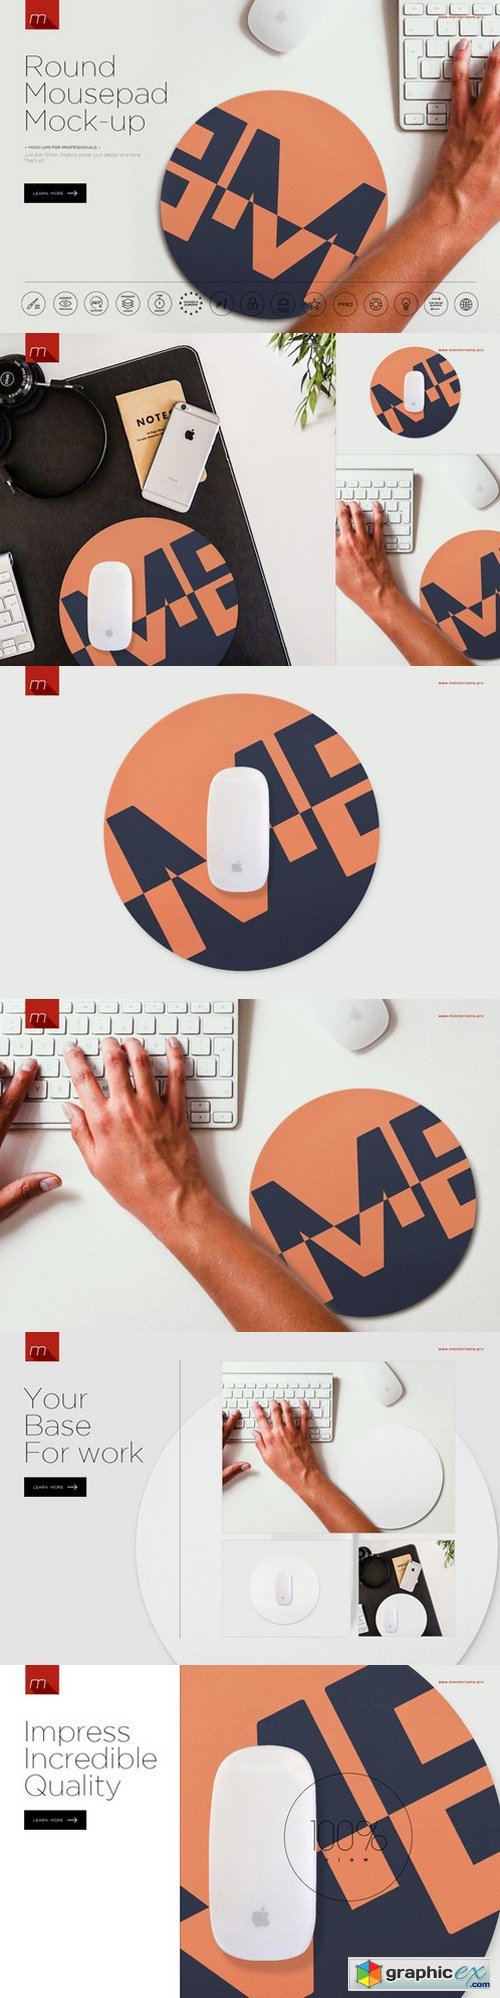 Round Mouse Pad Mock-up